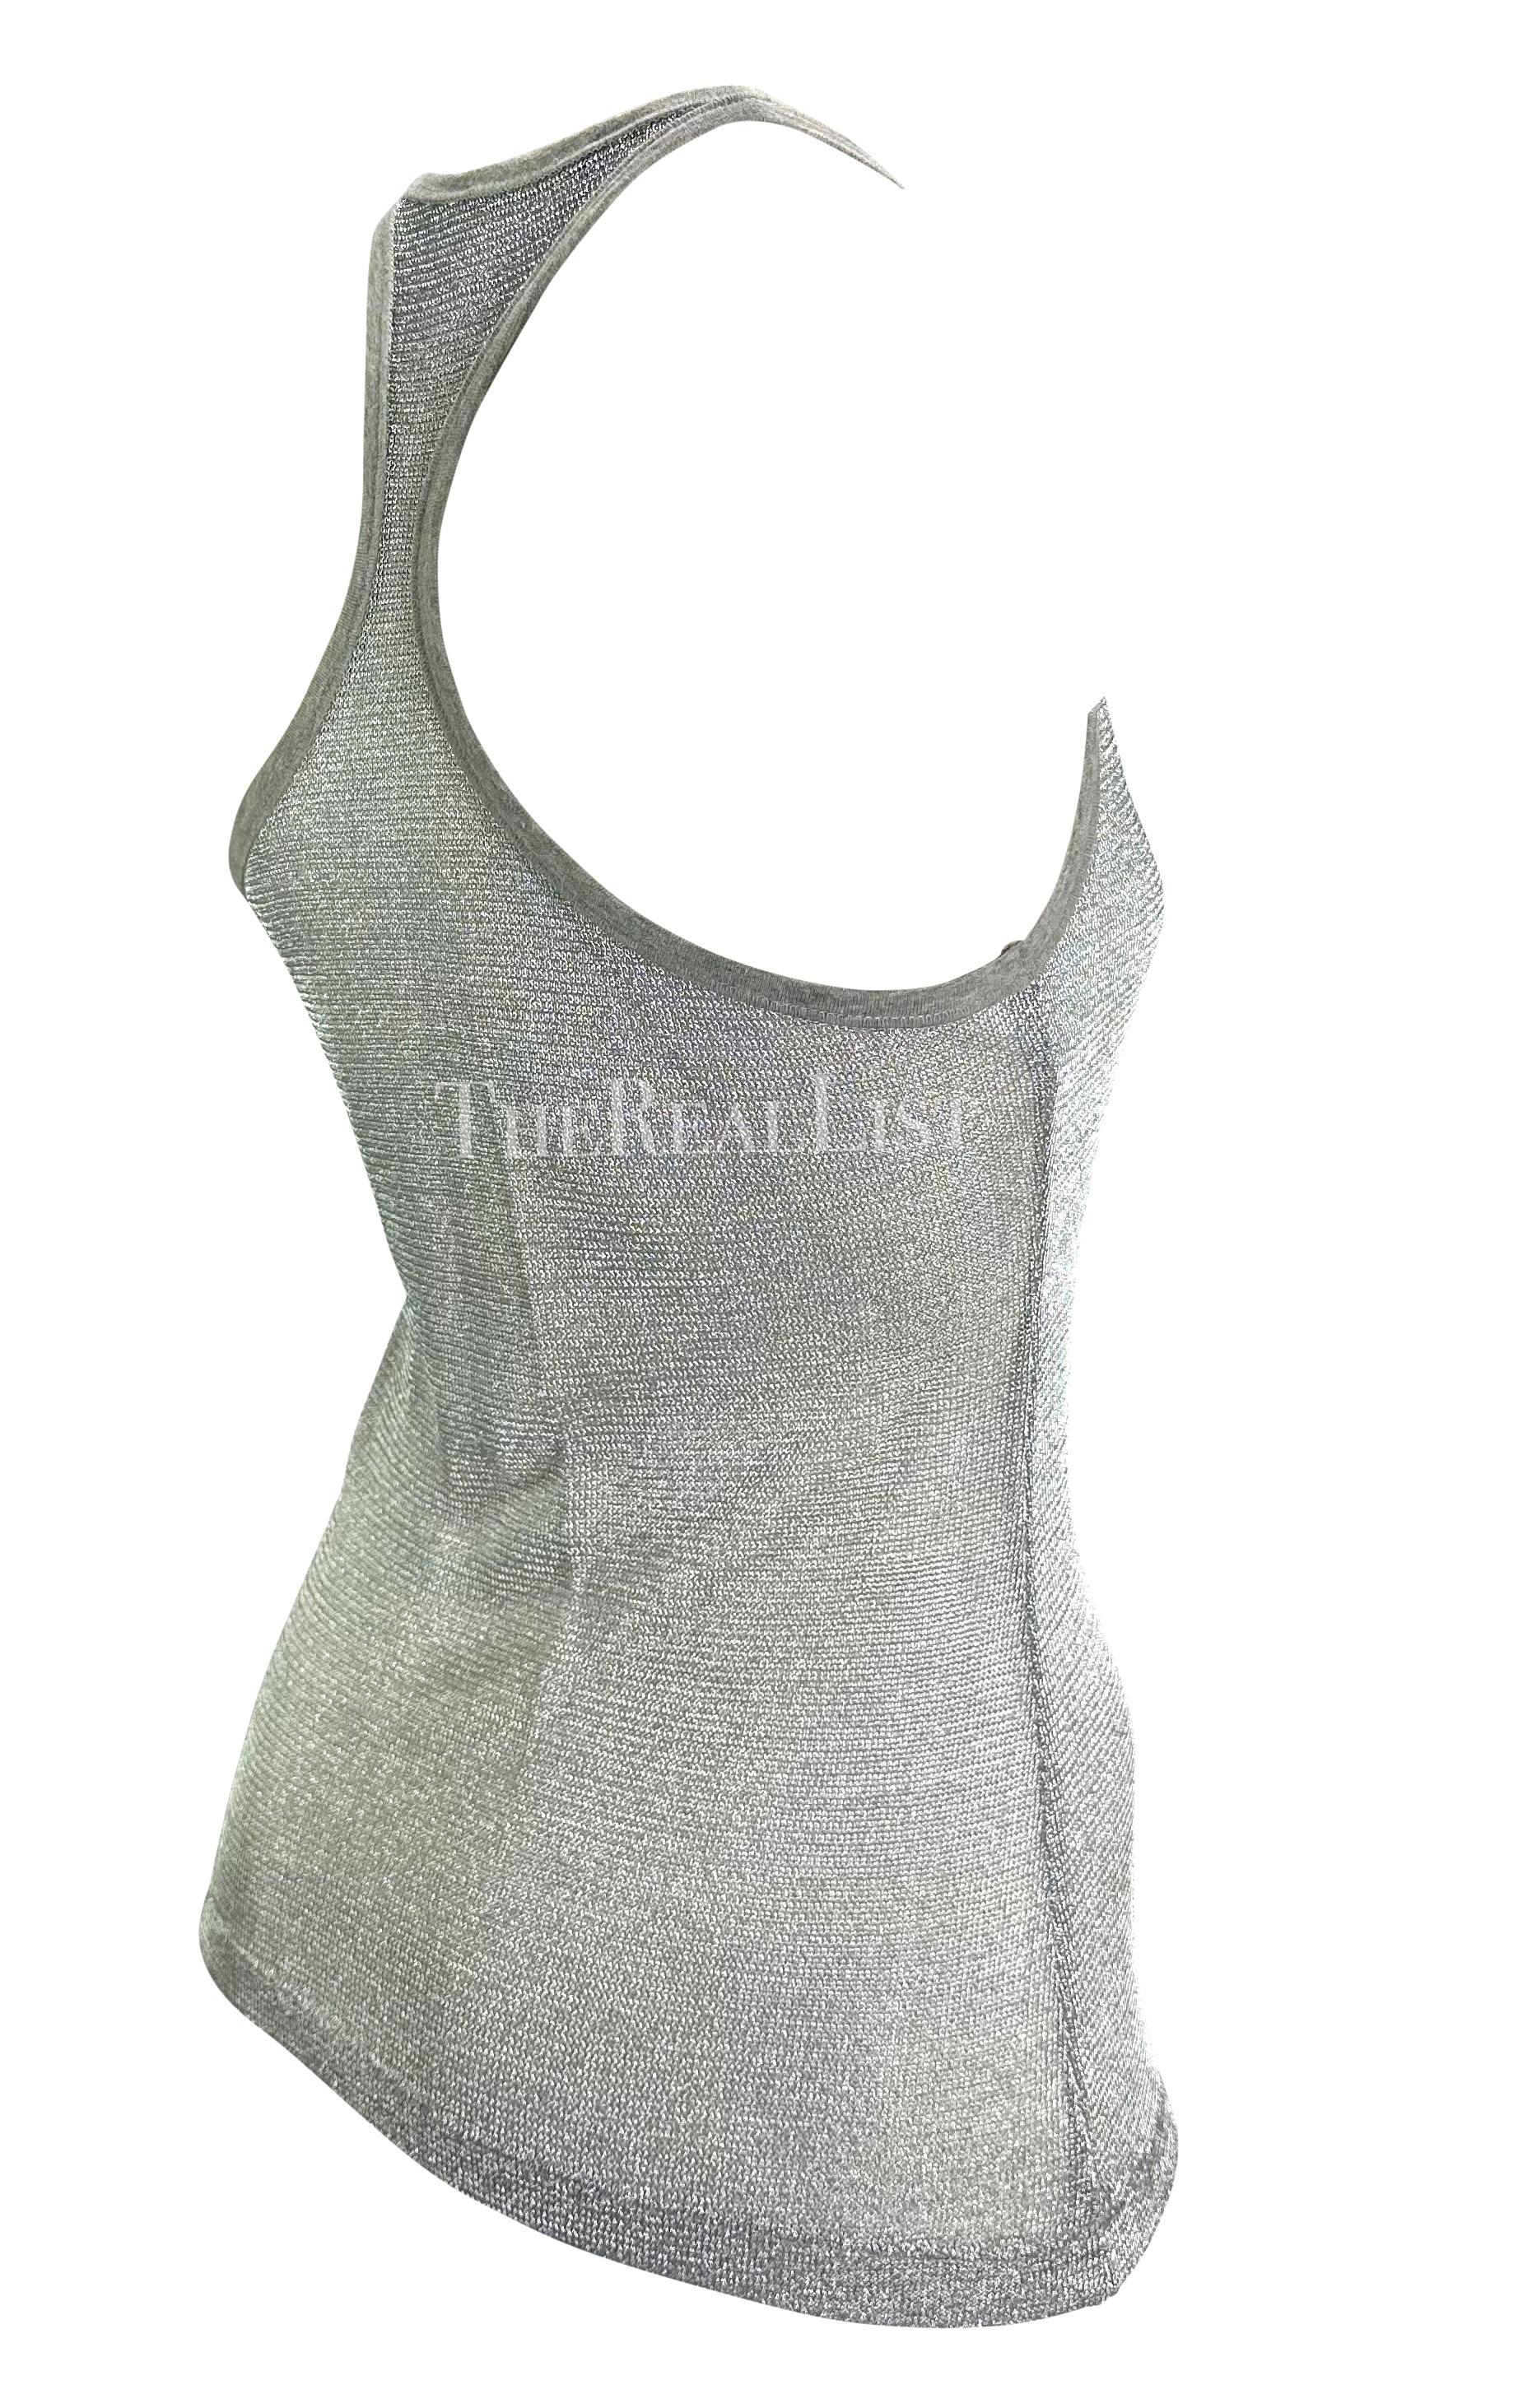 S/S 2003 Dolce & Gabbana Runway Ad Silver Woven Metal Mesh Racerback Tank Top  For Sale 6